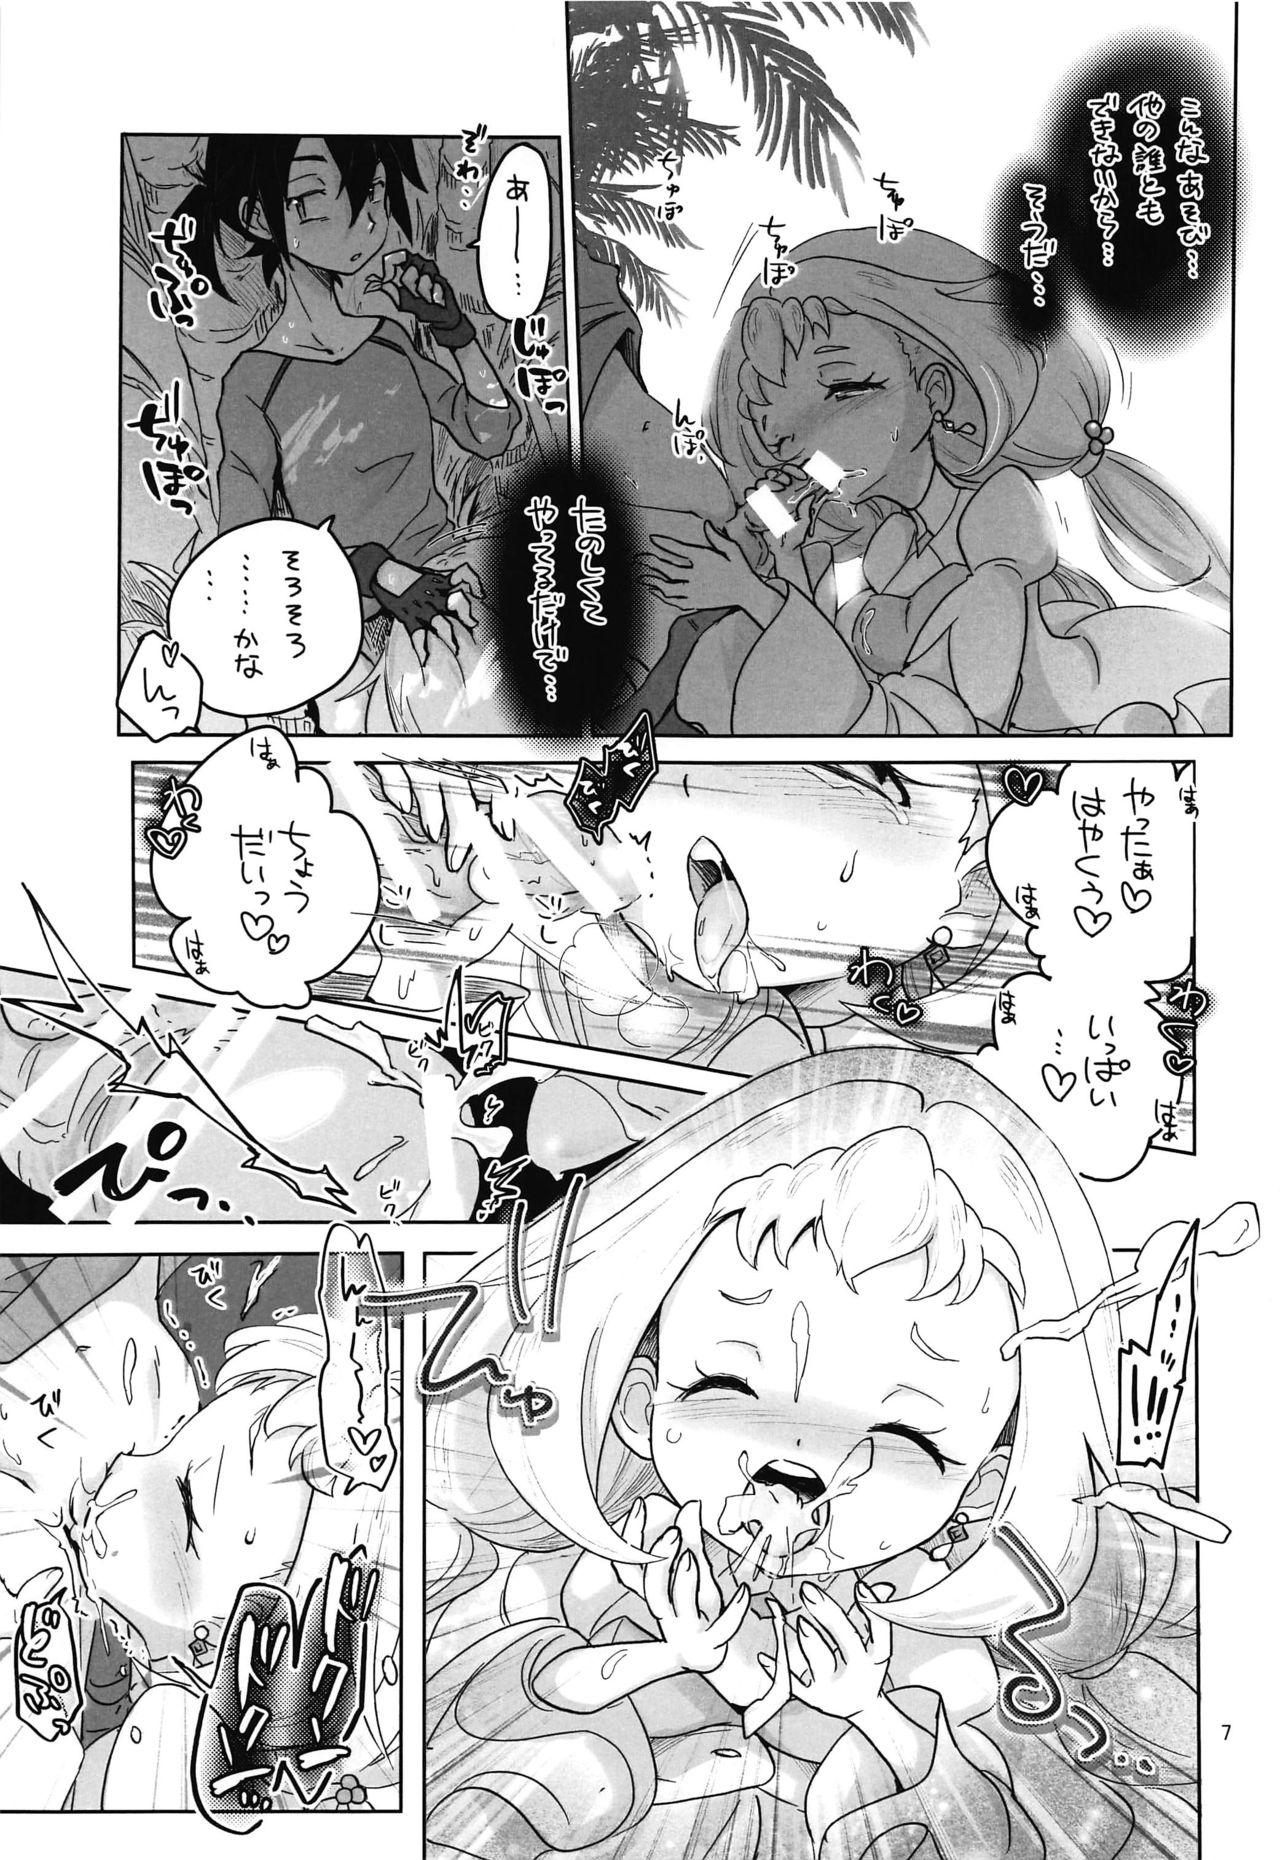 Kitchen Comin' Thro' the DAYDREAM - Gundam build divers Asshole - Page 6